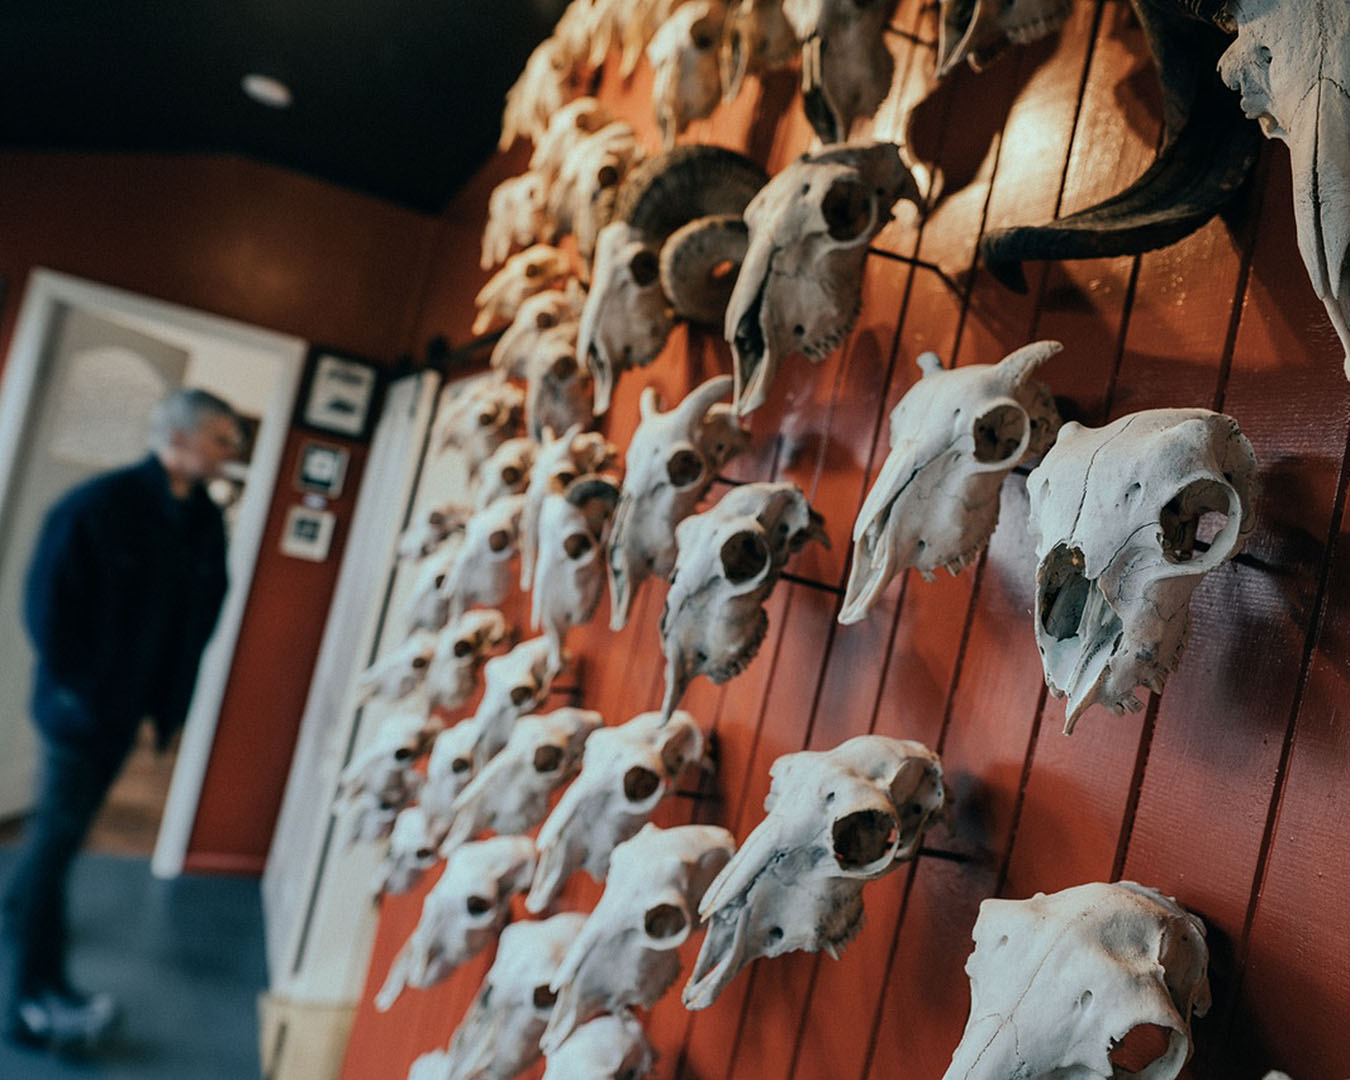 A man looks at all sorts of animal skulls at the museum of natural mystery.